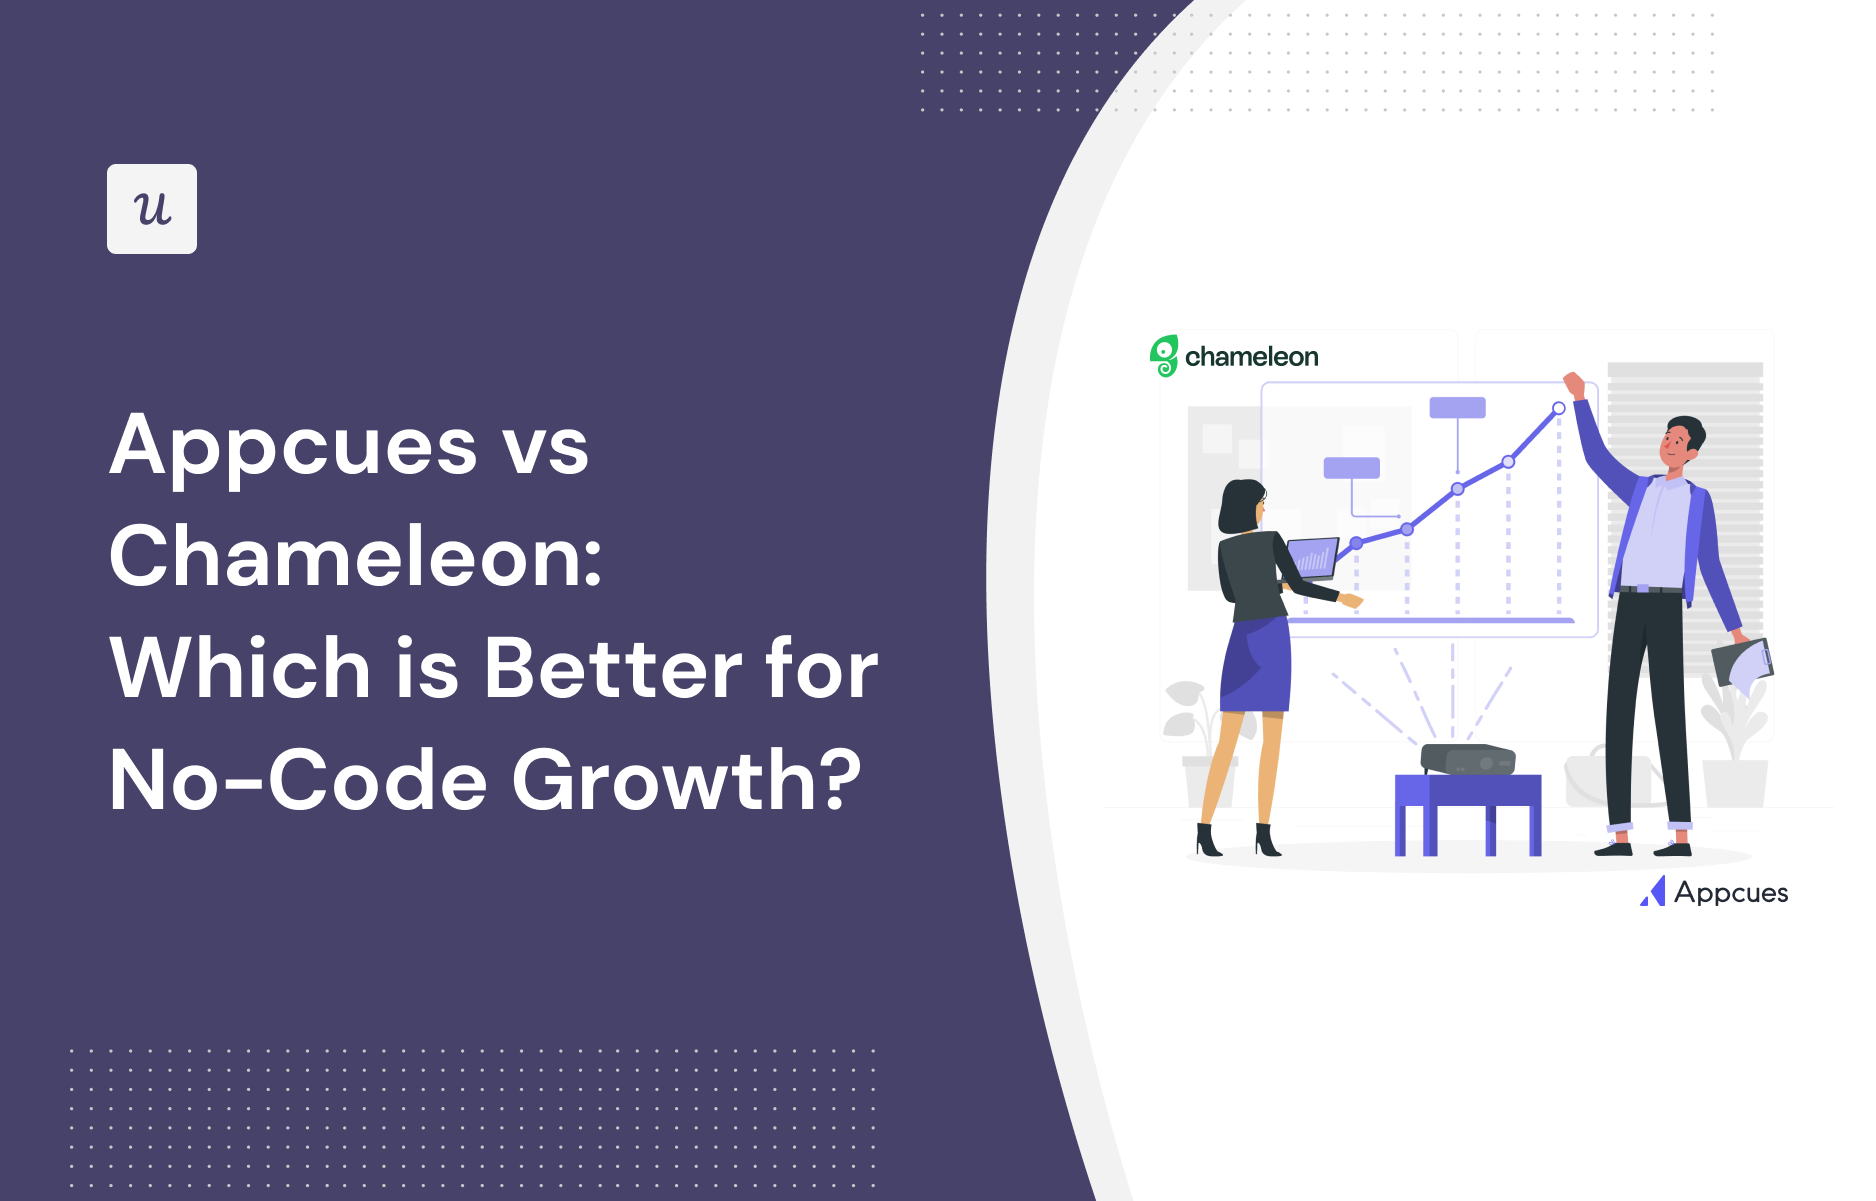 Appcues vs Chameleon: Which is Better for No-Code Growth?